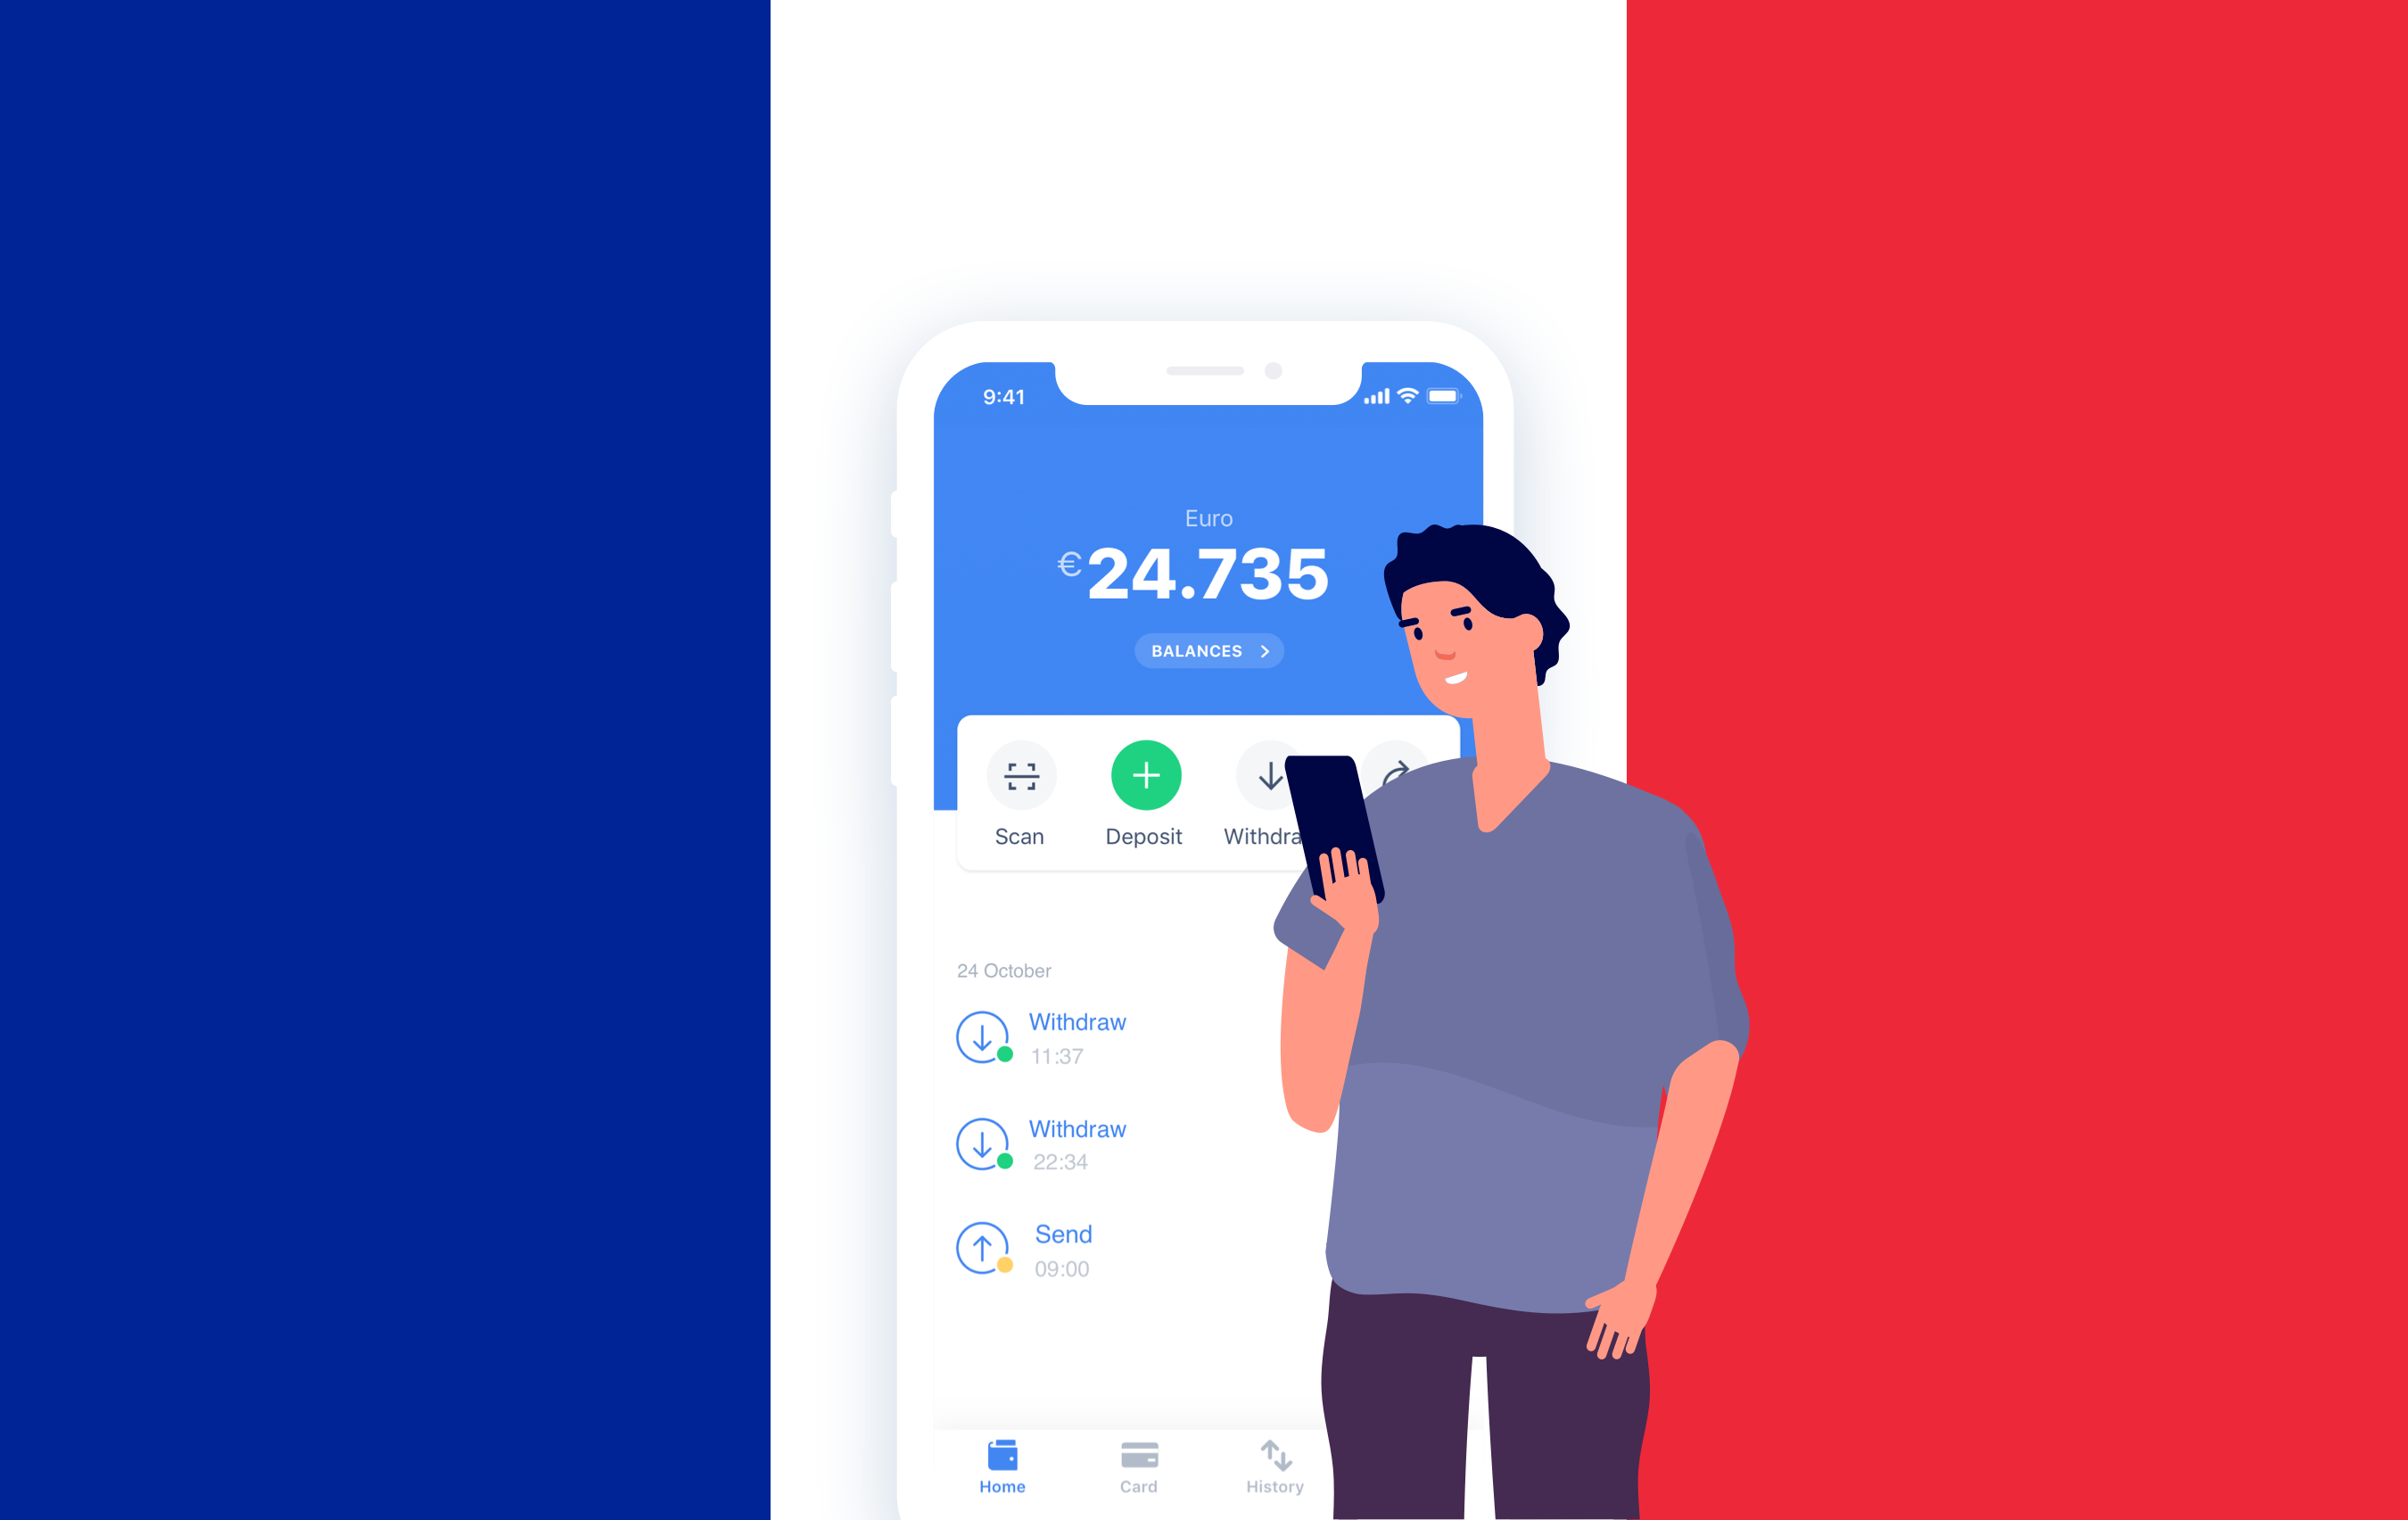 How to send money to France